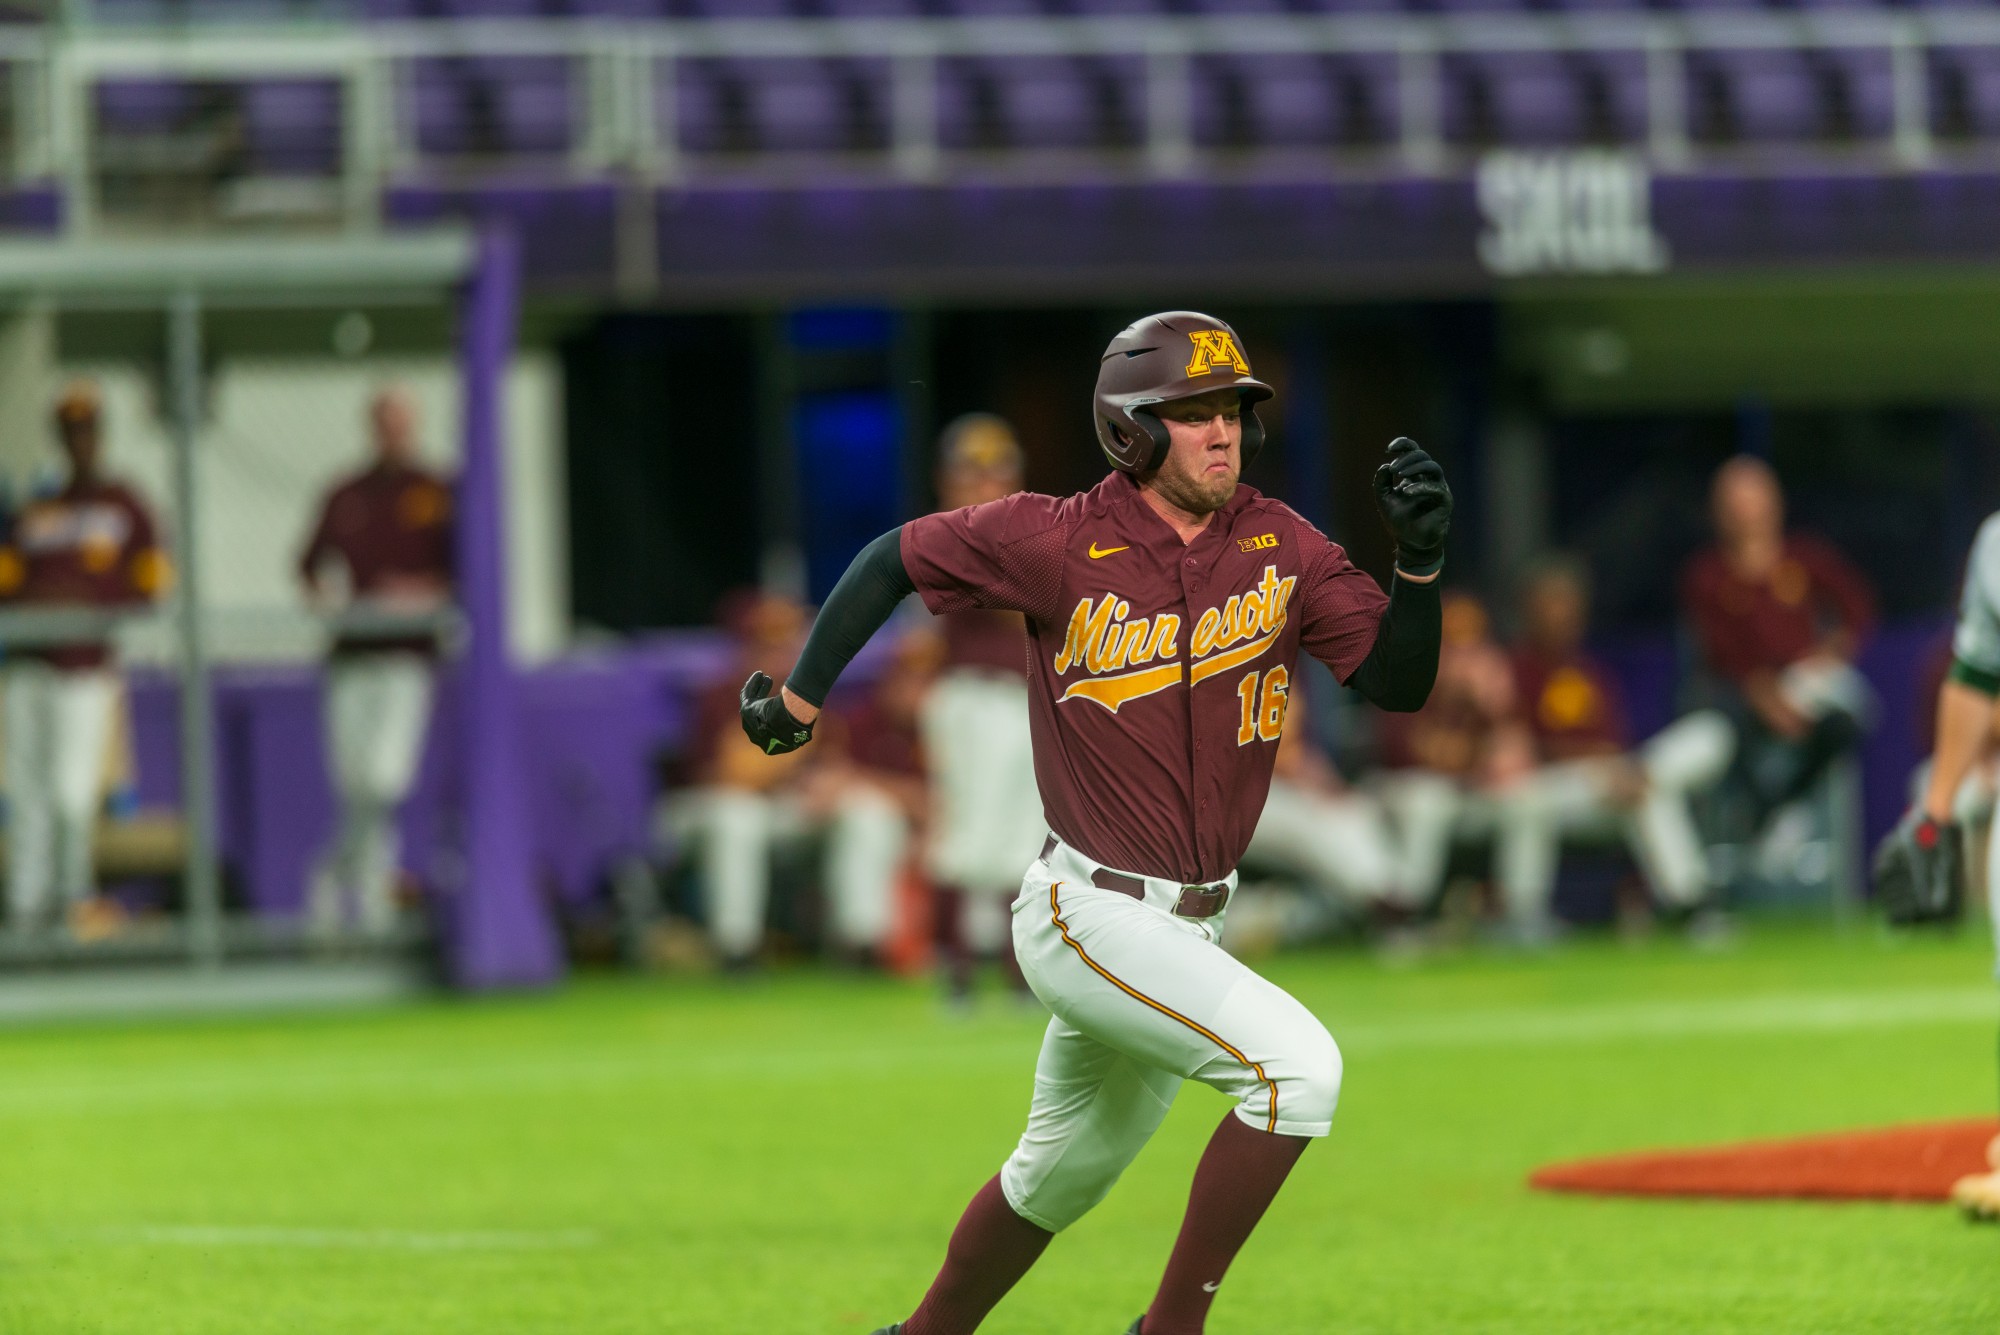 Gophers Outfielder Easton Bertrand sprints for first base after a hit at U.S. Bank Stadium on Tuesday, March 3.